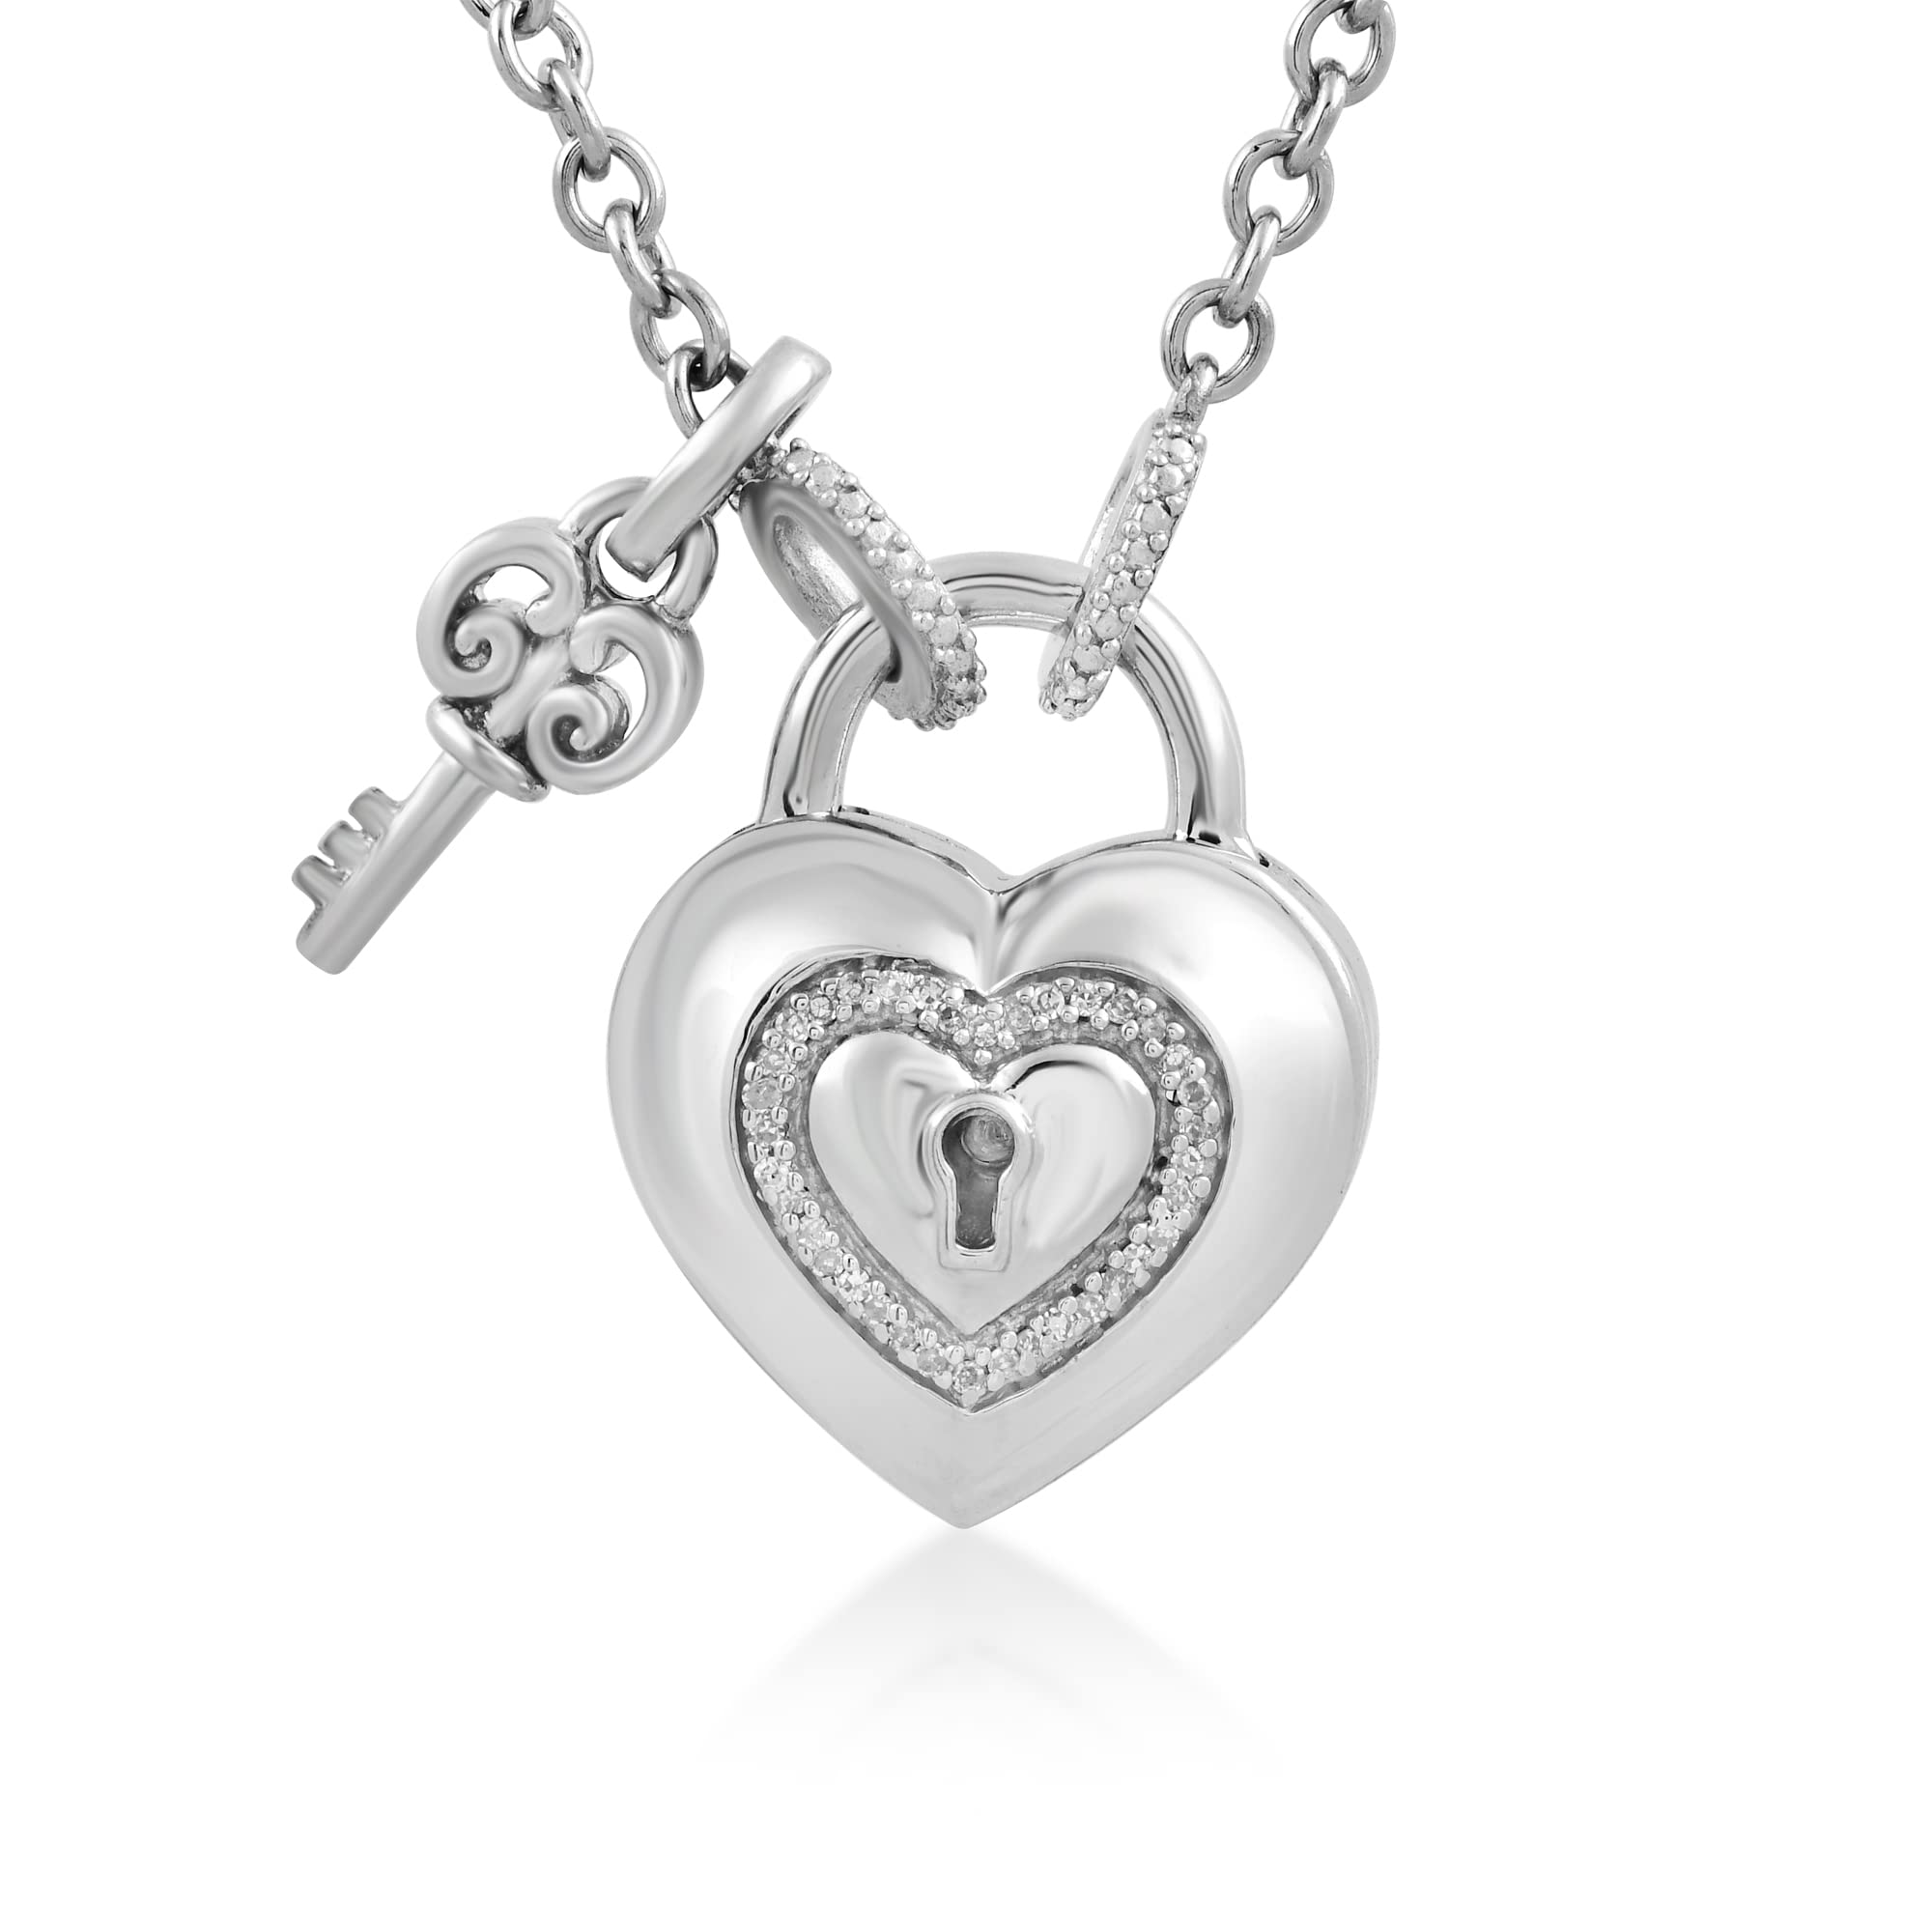 Blue & White Lab-Created Sapphire Heart Lock & Key Necklace Sterling Silver  18